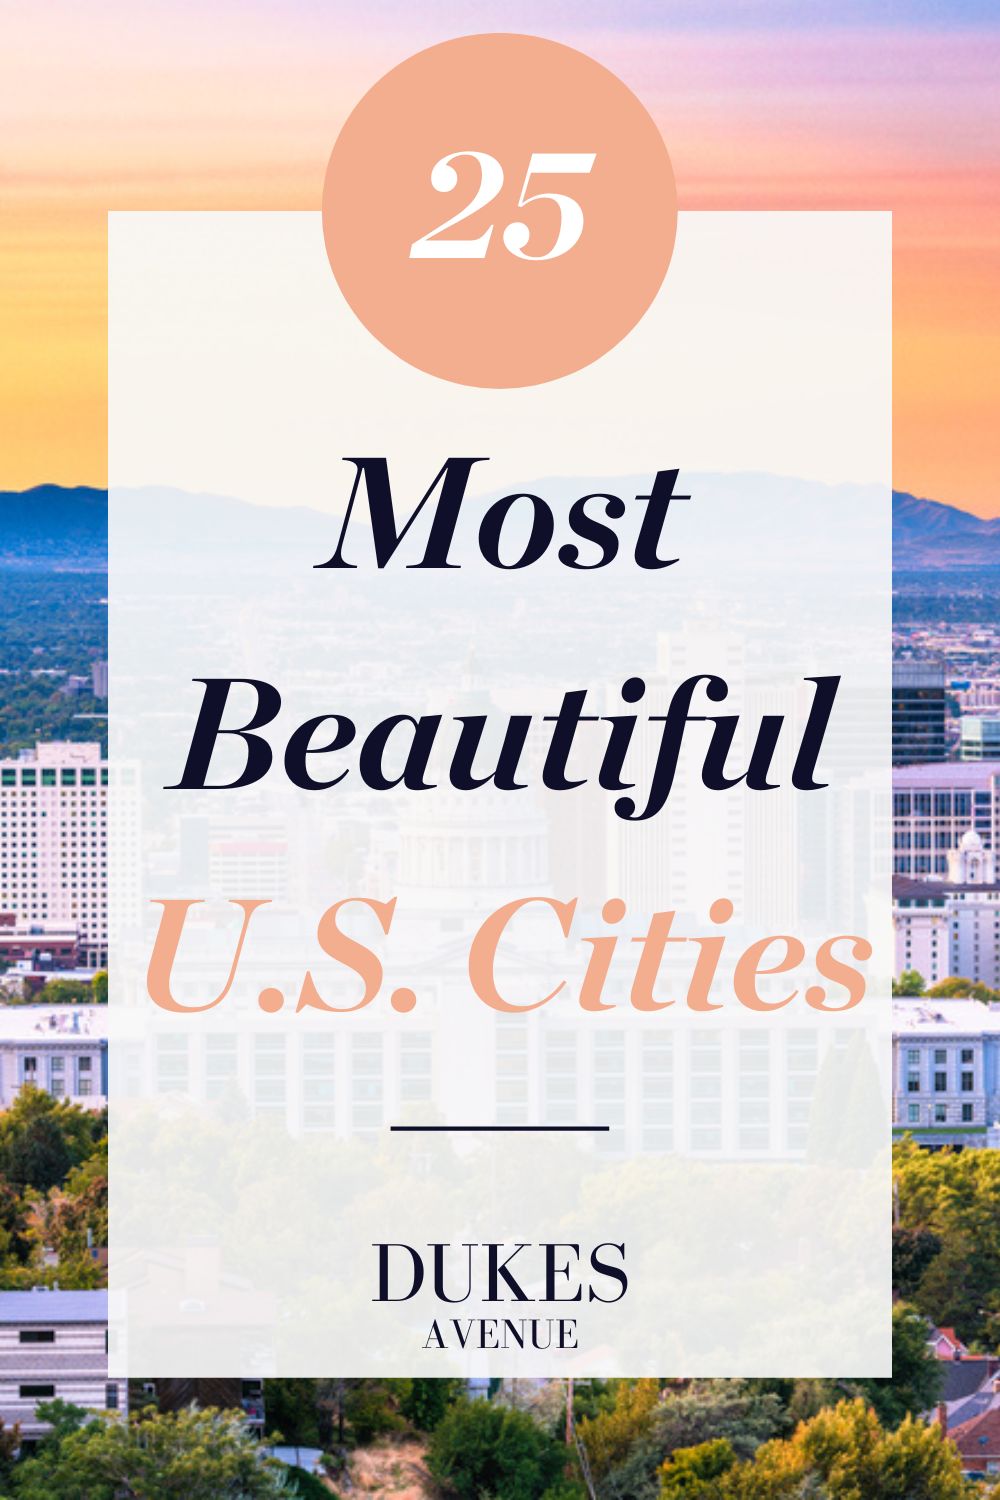 Image of an American city with text overlay '25 Most Beautiful U.S. Cities'